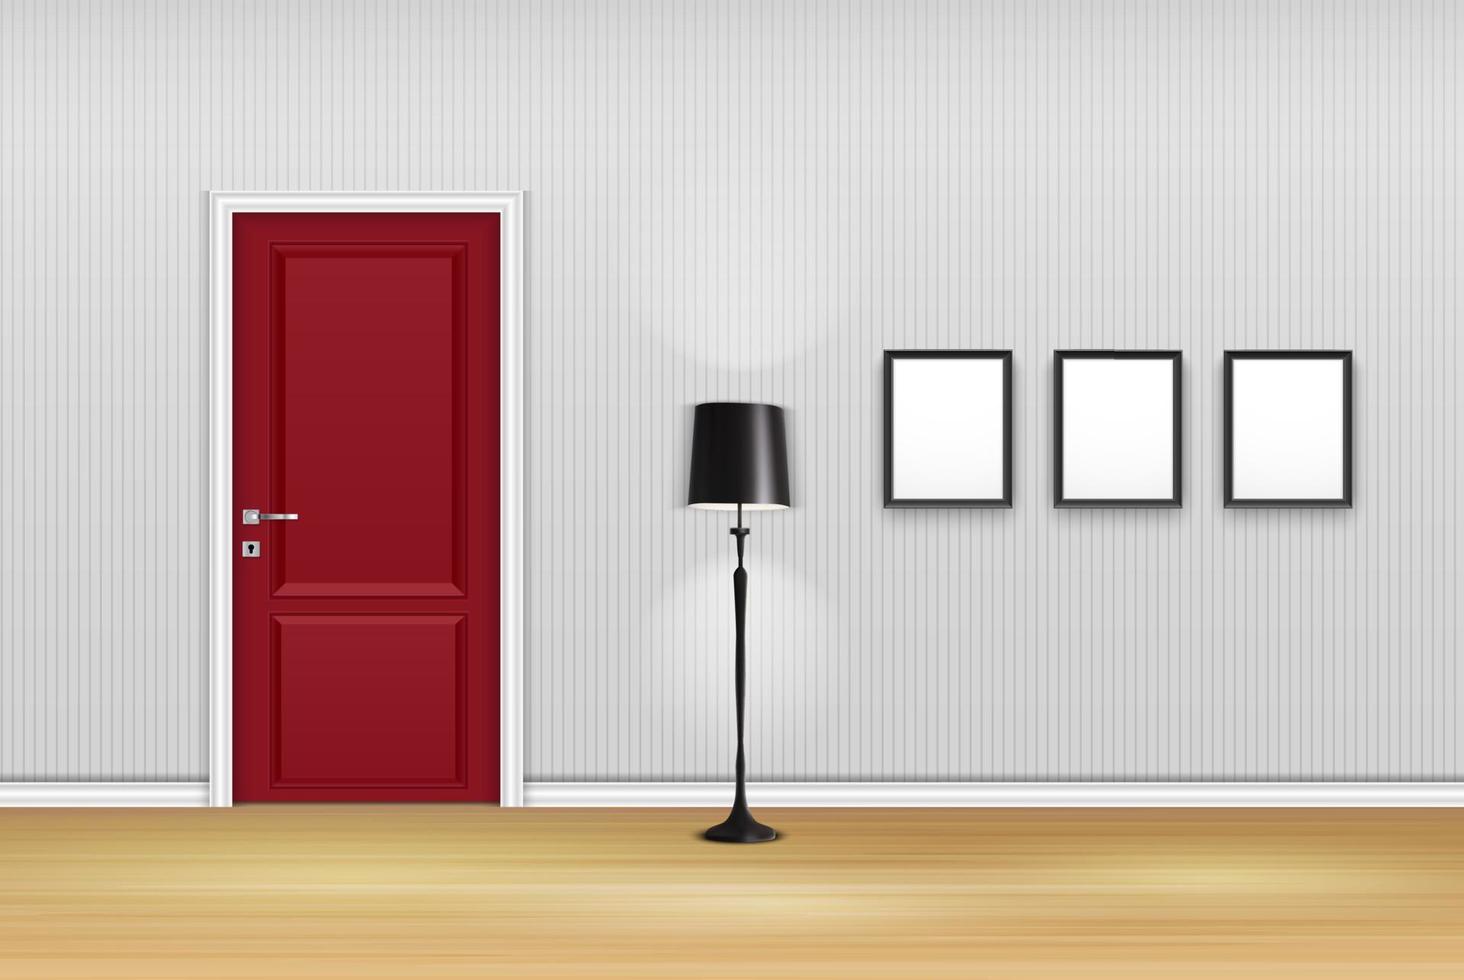 Vector illustration of Living room interior with closed door, lamp, and empty frames on the wall